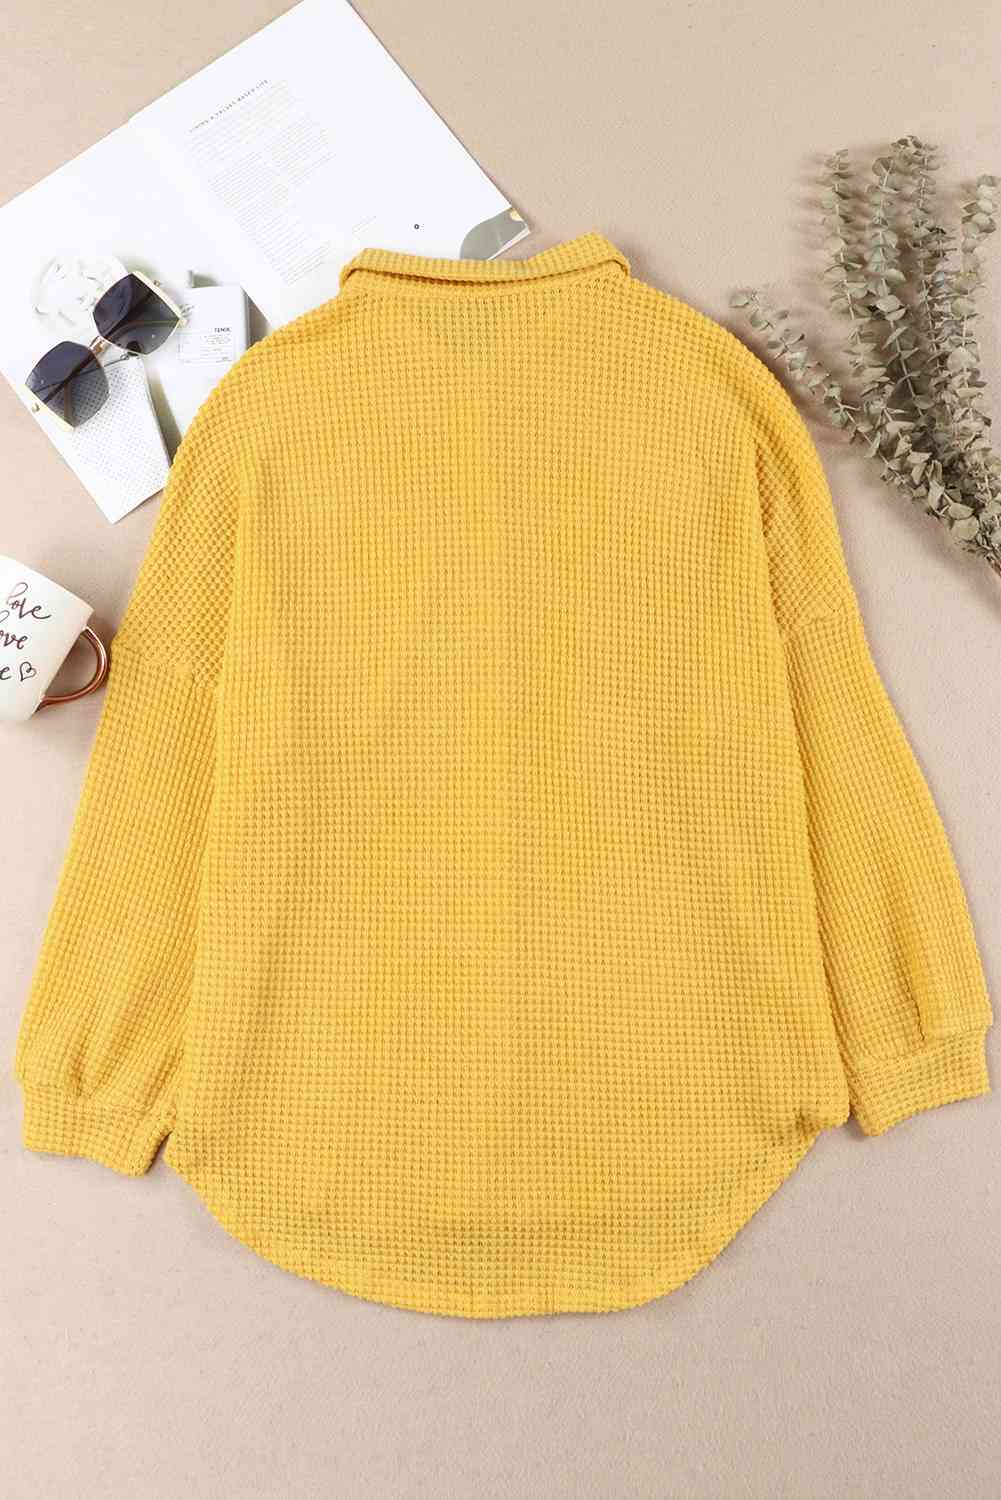 Waffle-Knit Button Up Long Sleeve Shirt with Pocket